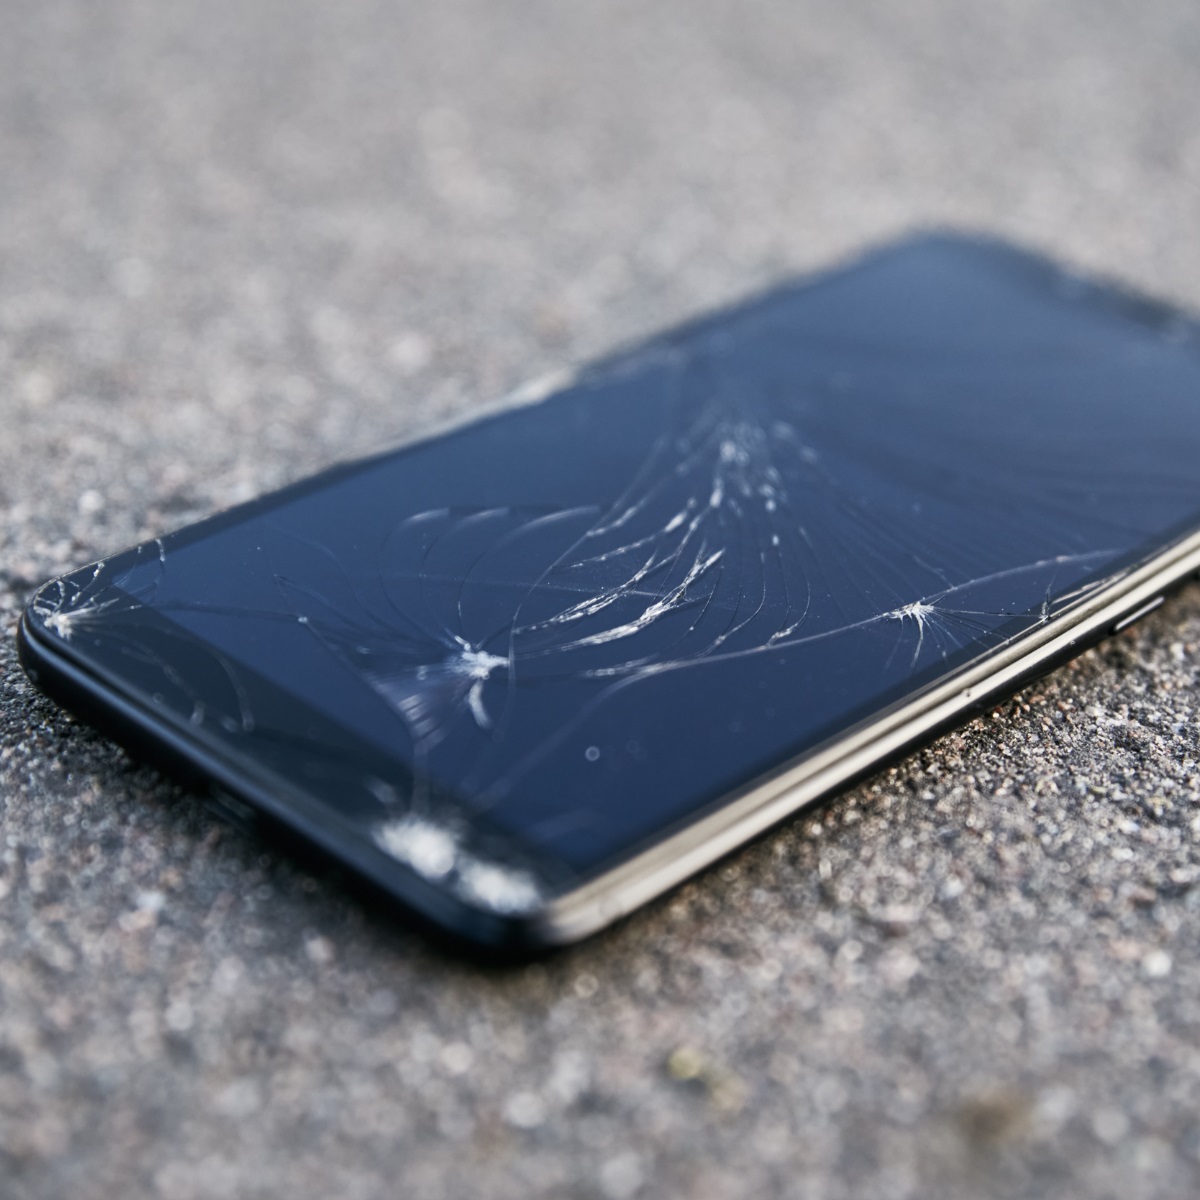 cell phone with cracked screen laying on ground